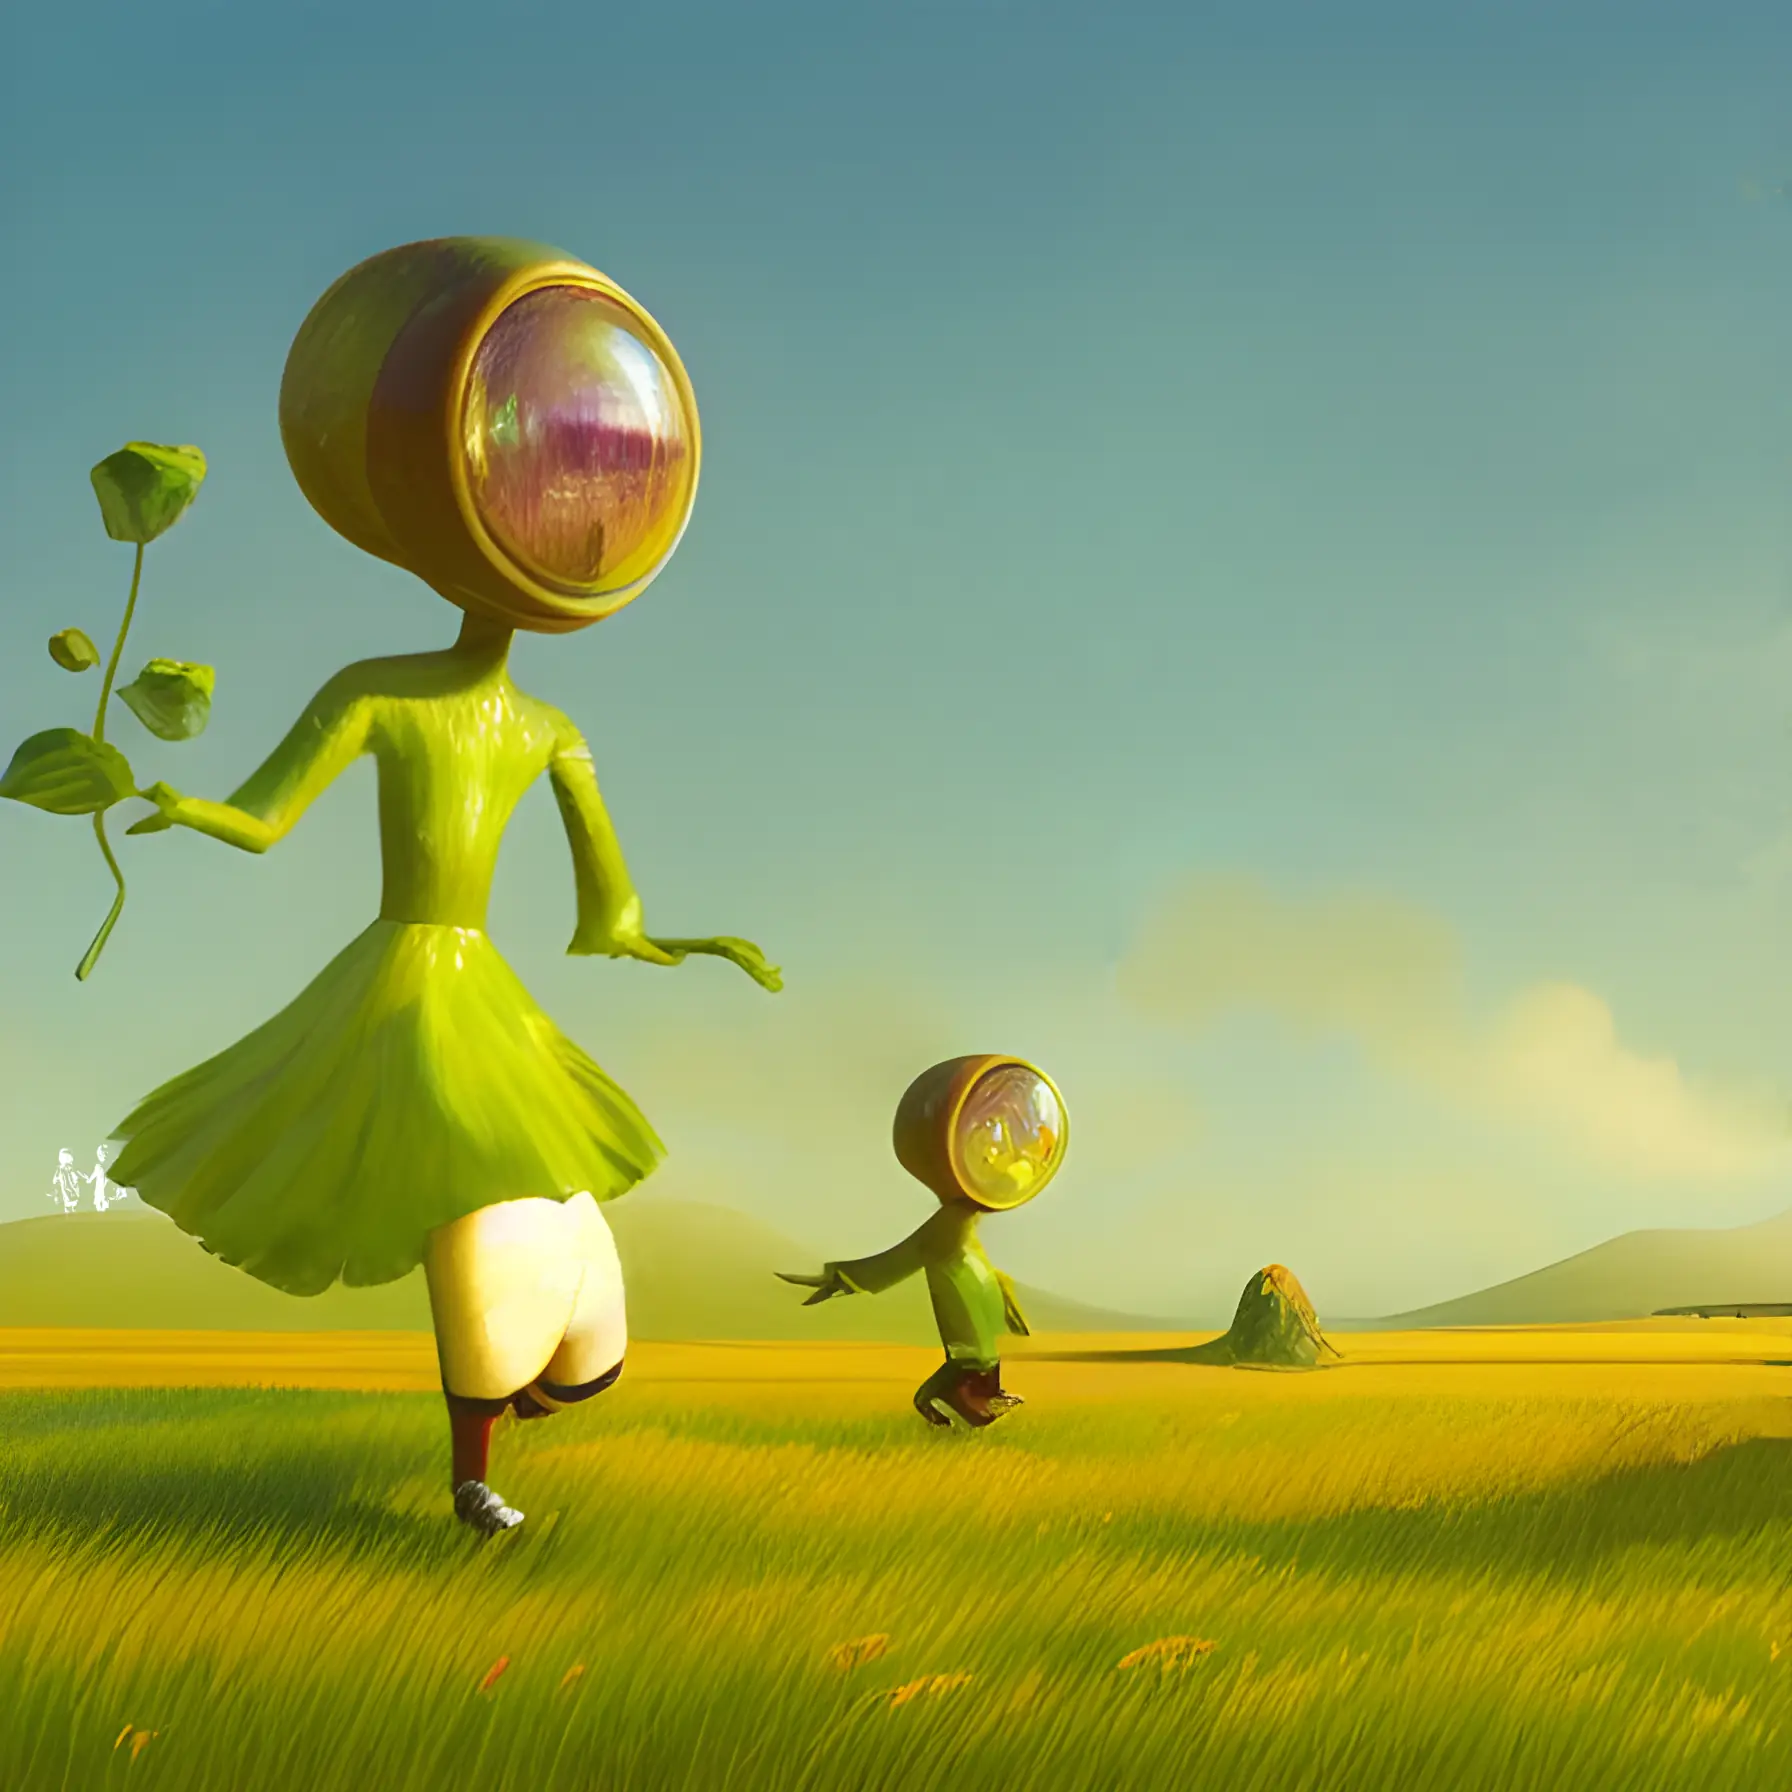 A woman and a child are running in a meadow on a bright, sunny day. They are wearing weird faceplates and dressed like characters from The Sound of Music.